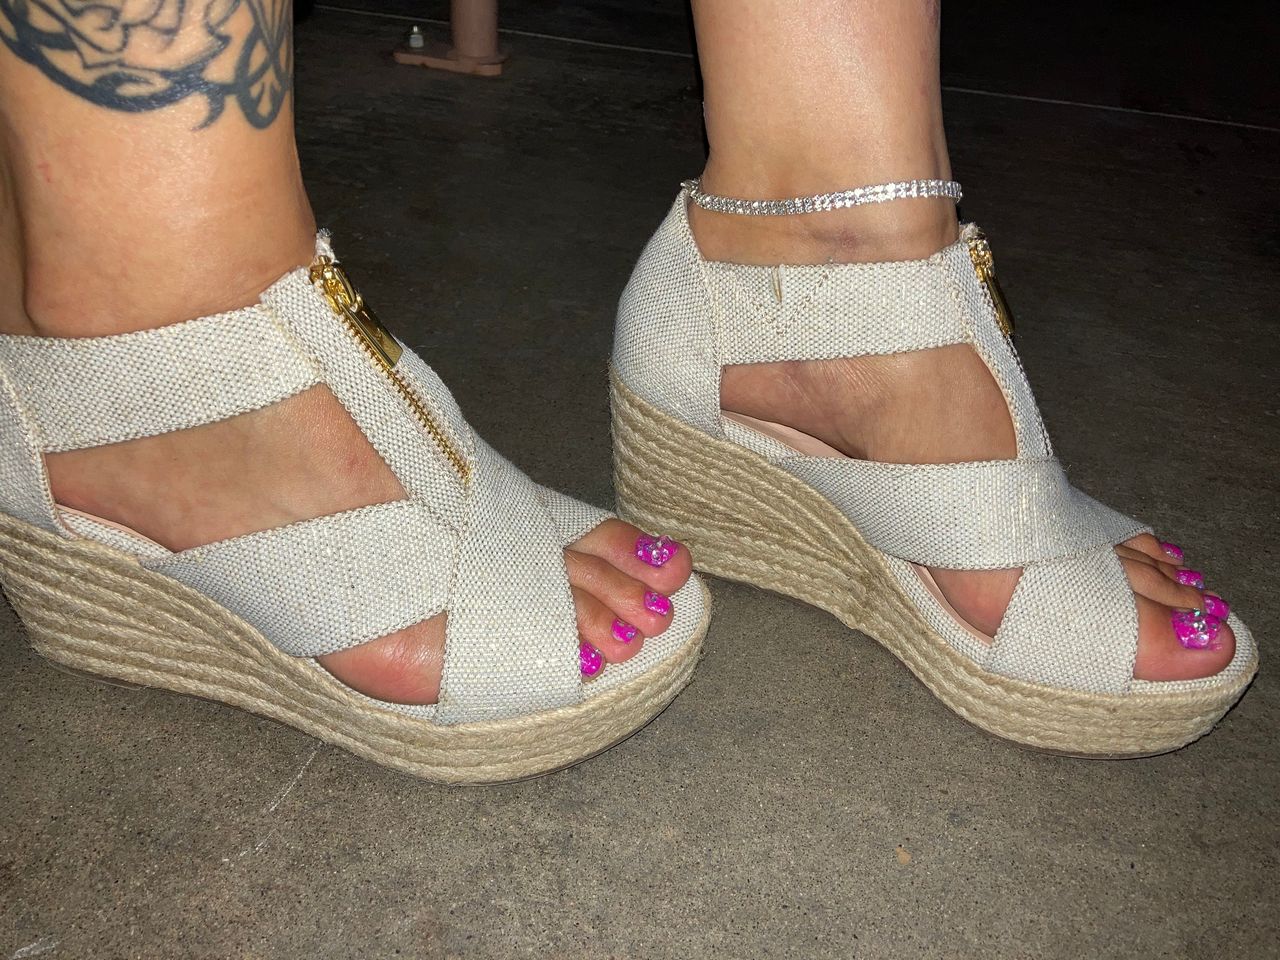 Bekka Sexy Arches In New Wedges